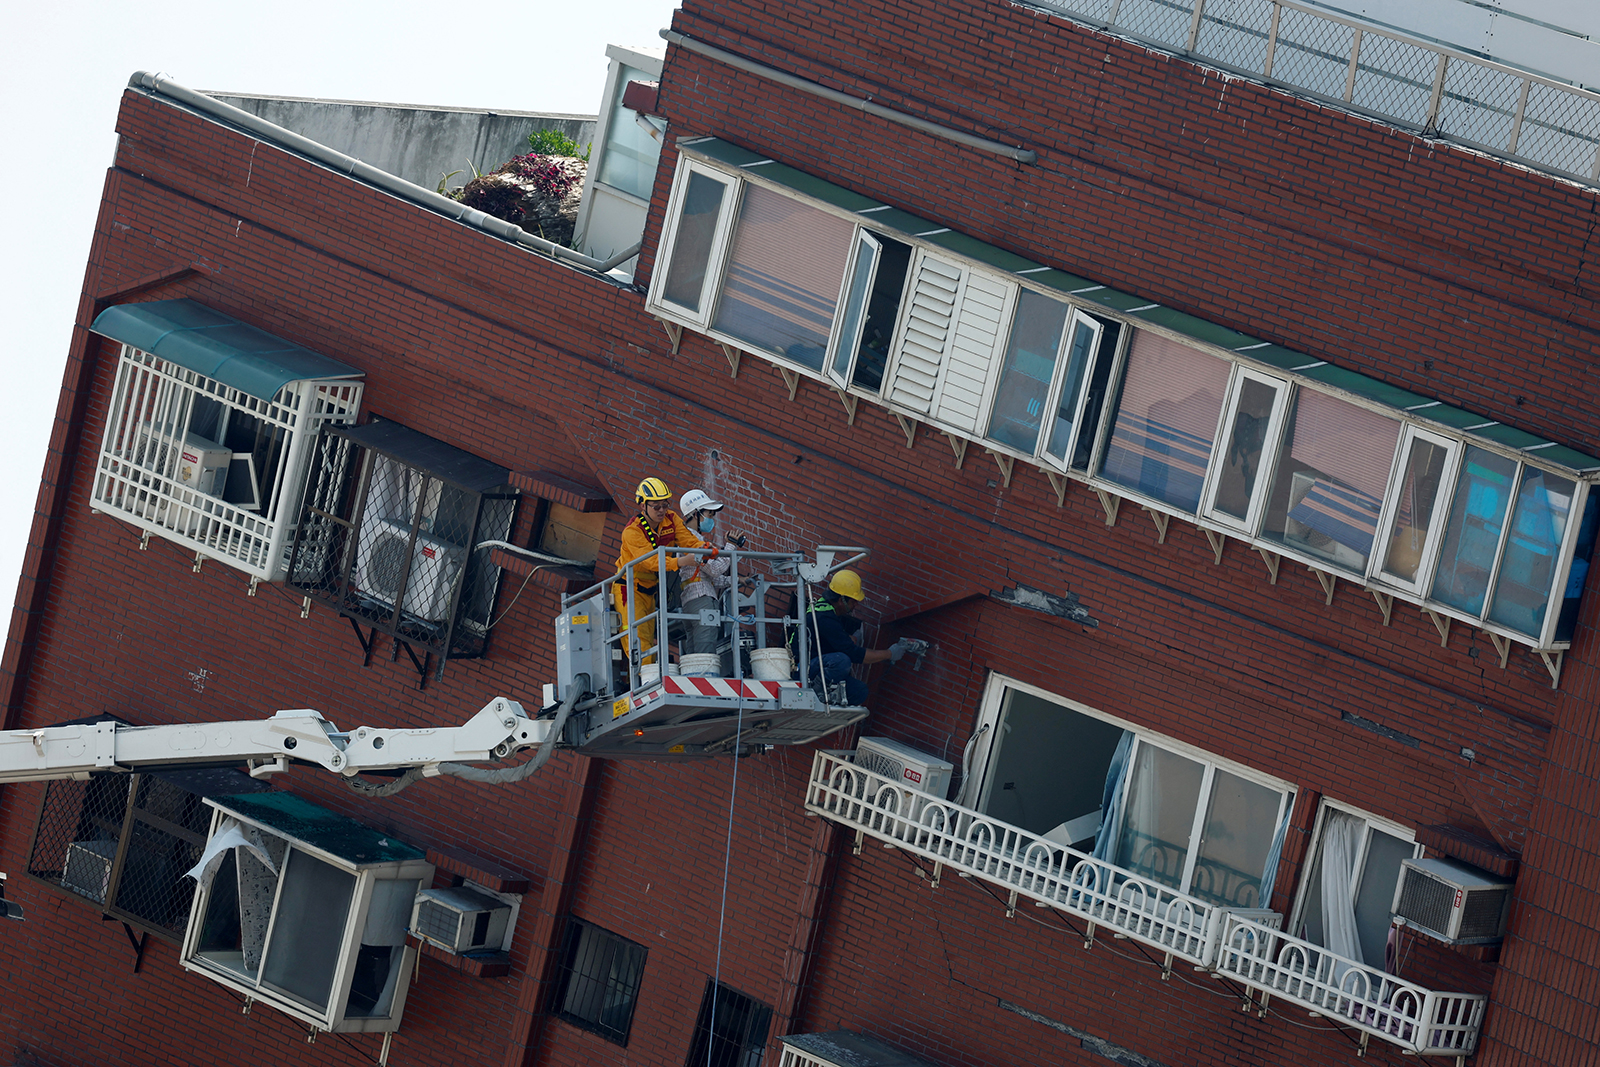 Workers carry out operations at the site where a building collapsed, following the earthquake, in Hualien, Taiwan on April 4.